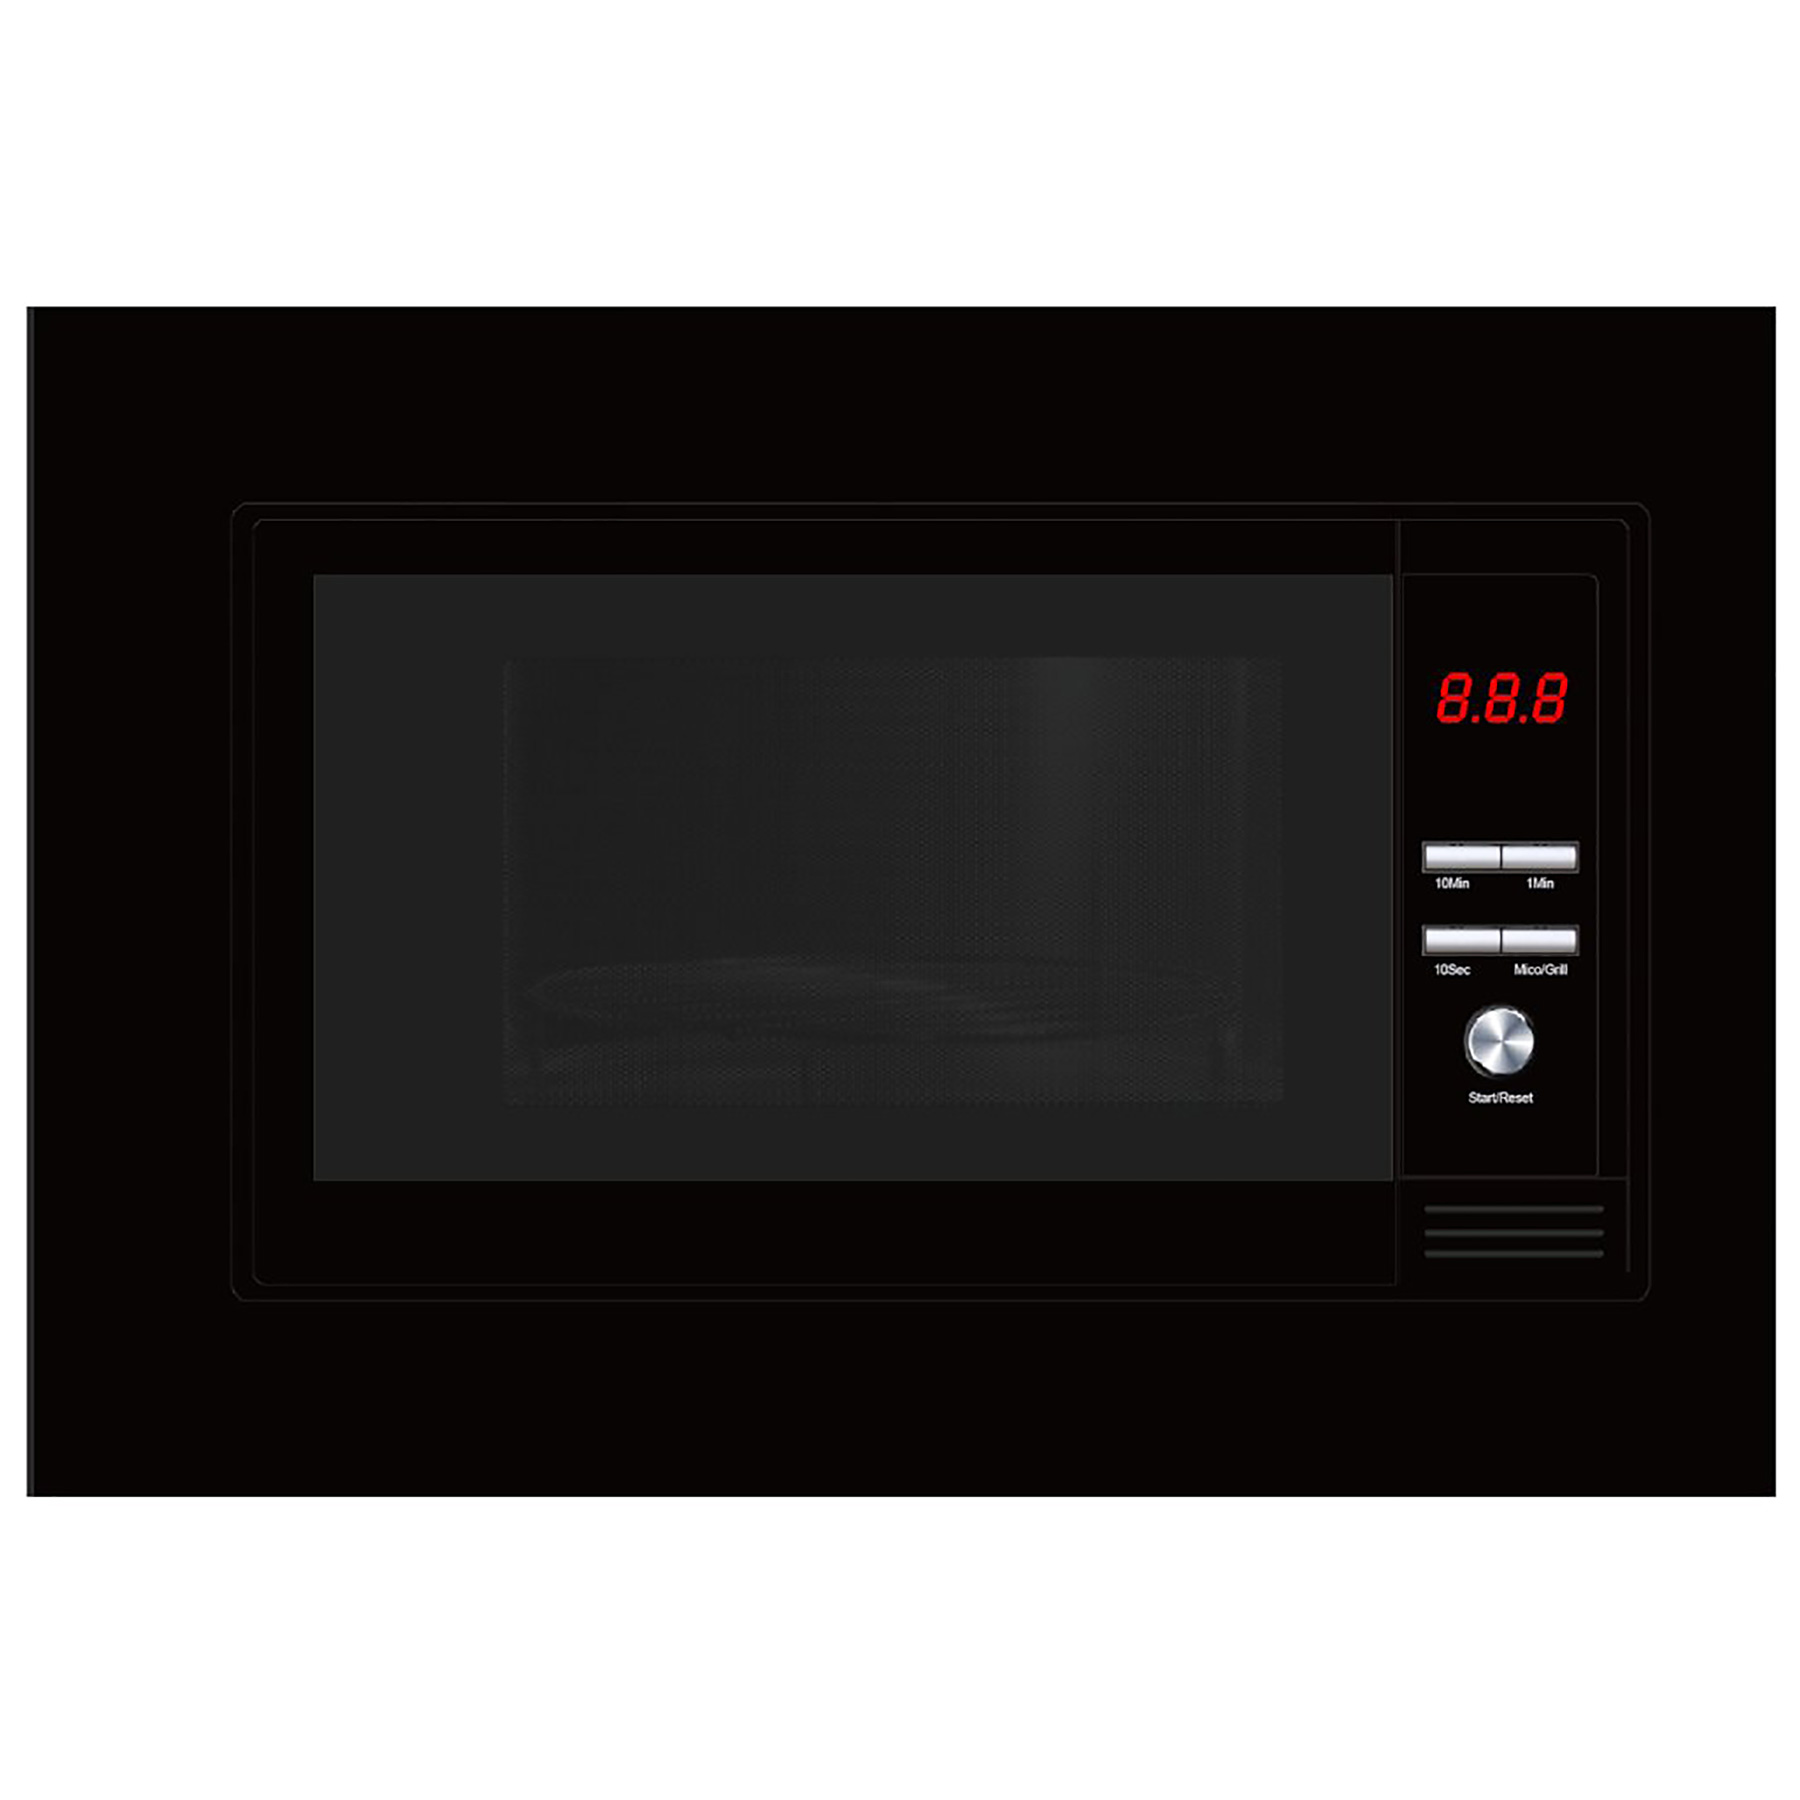 Image of Culina UBMICROL20BK Built In Microwave Oven with Grill in Black 700W 2